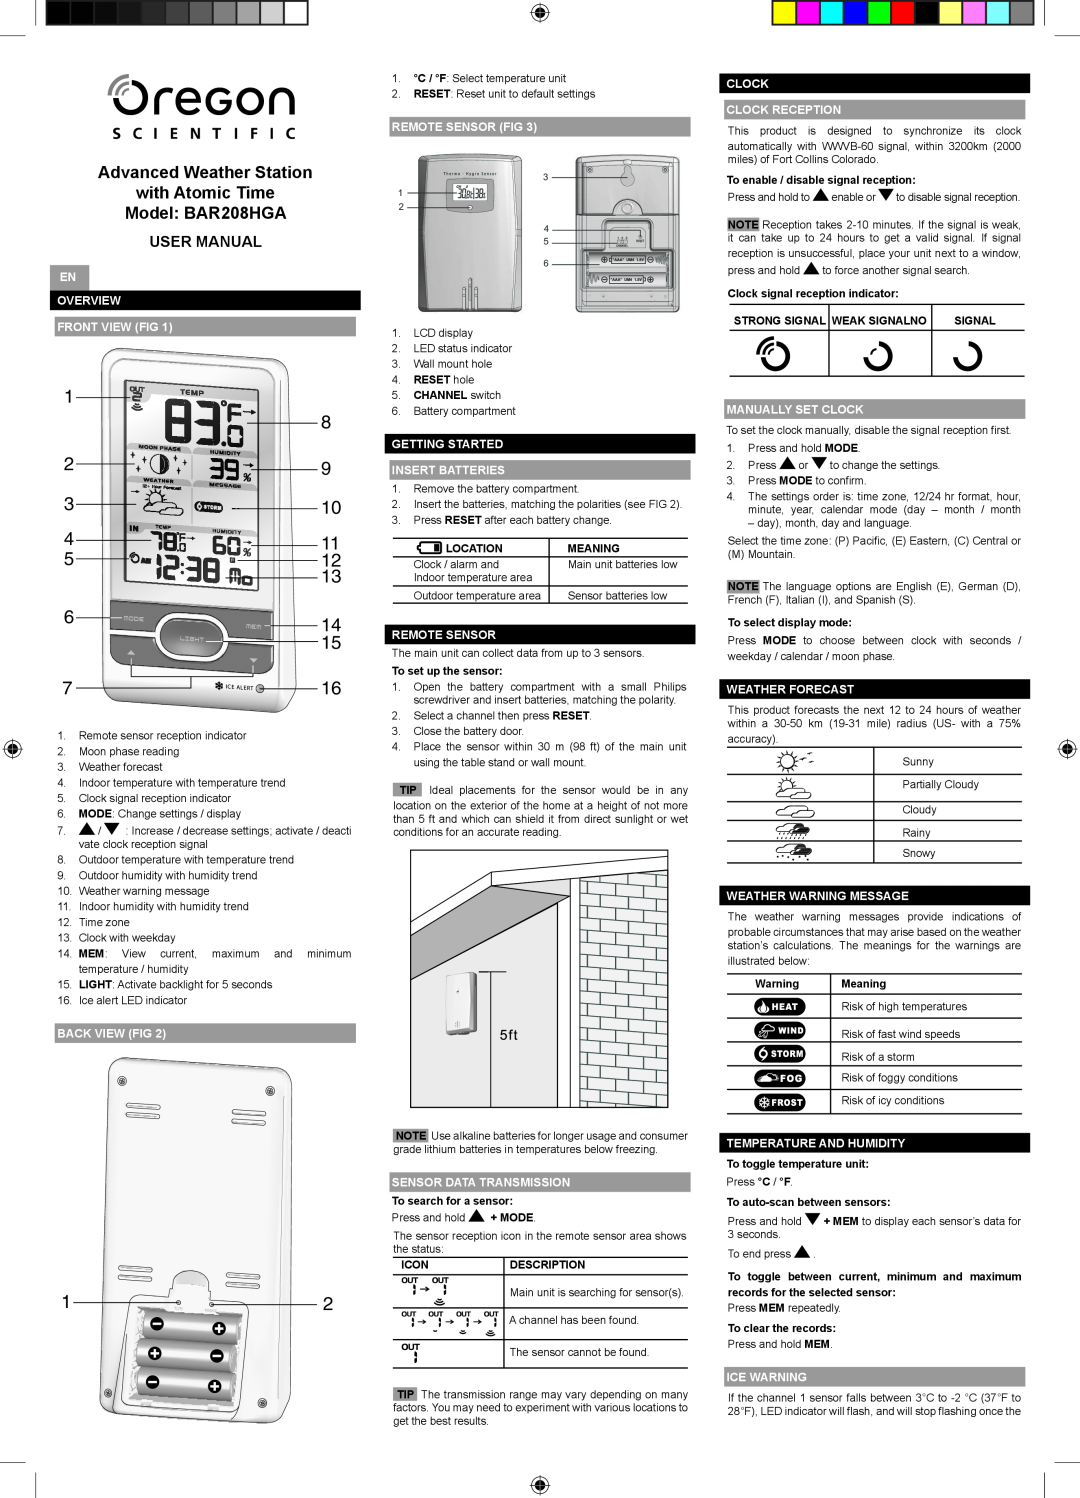 Oregon Scientific user manual Advanced Weather Station with Atomic Time, Model: BAR208HGA, User Manual 